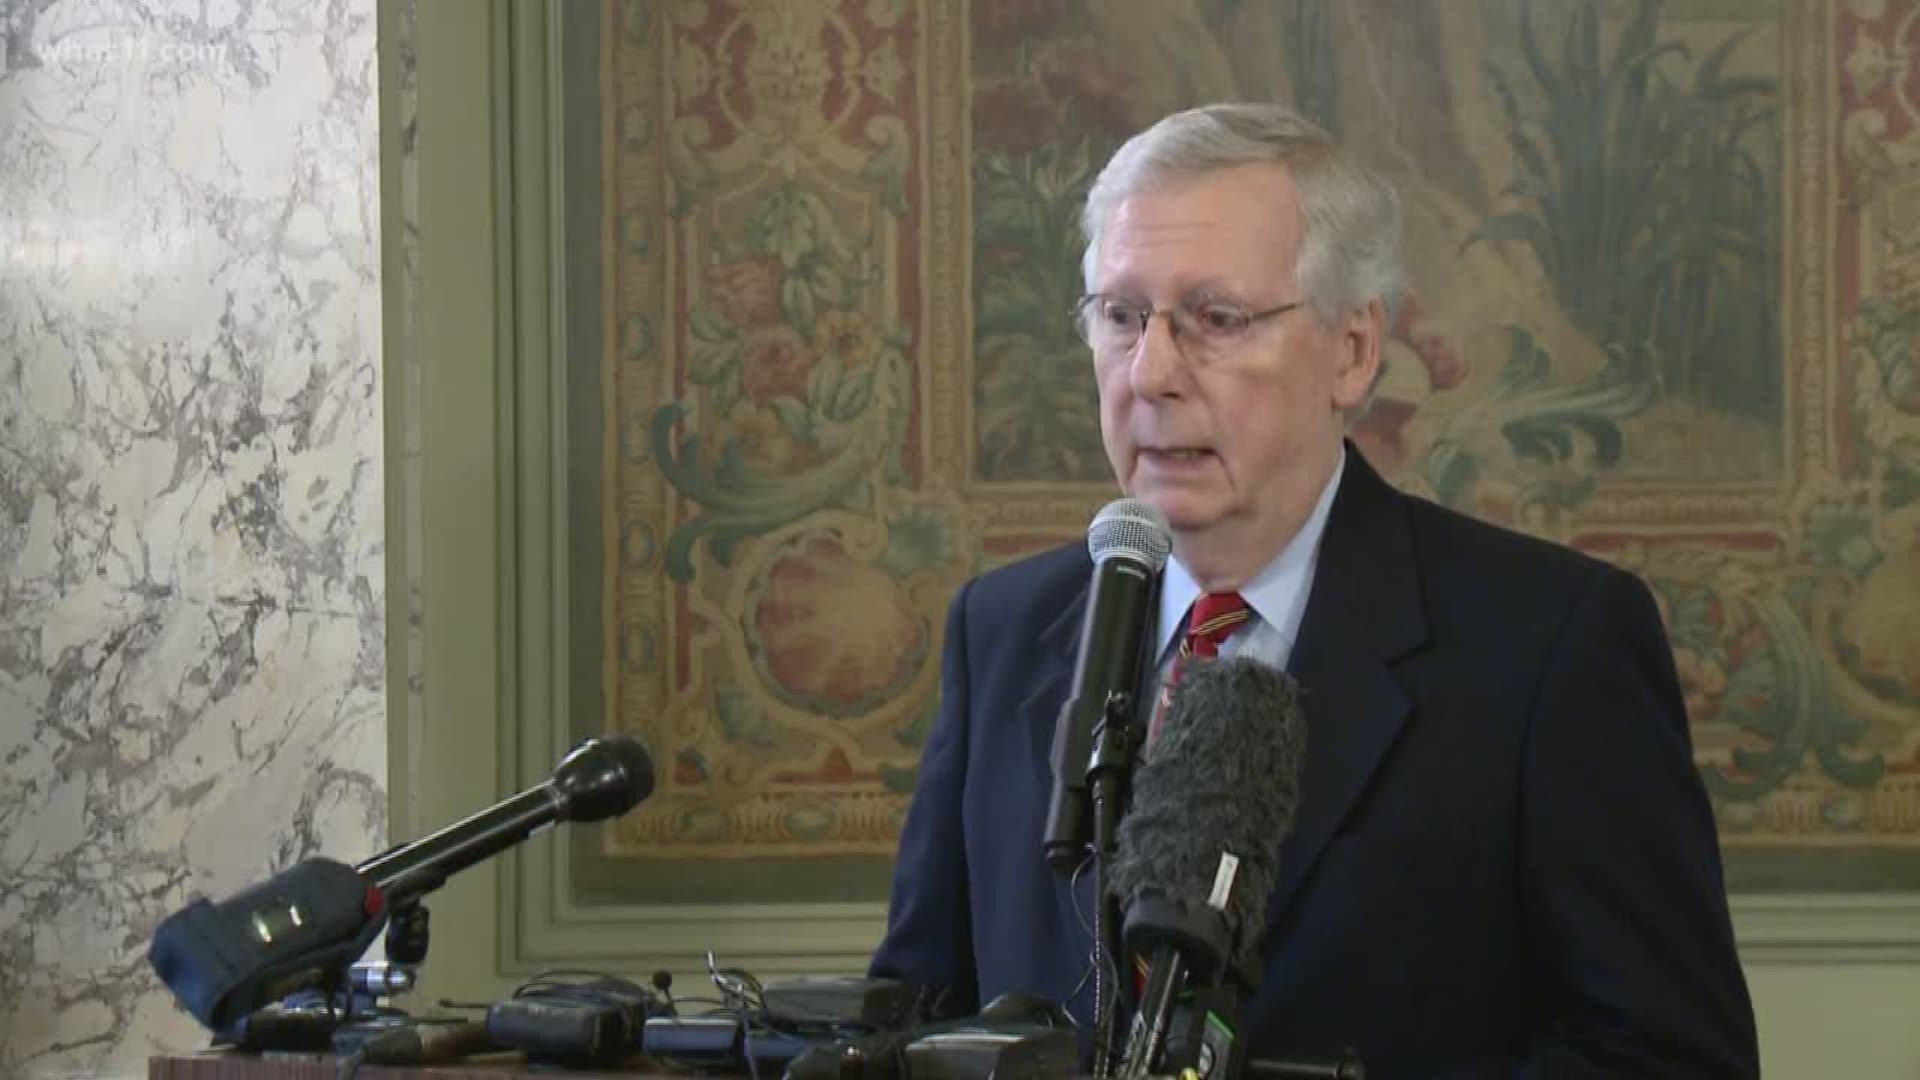 The mass shooting at a college dance party, the Mueller investigation, Jeff Sessions, and hemp in Kentucky were topics McConnell addressed on Nov. 9.